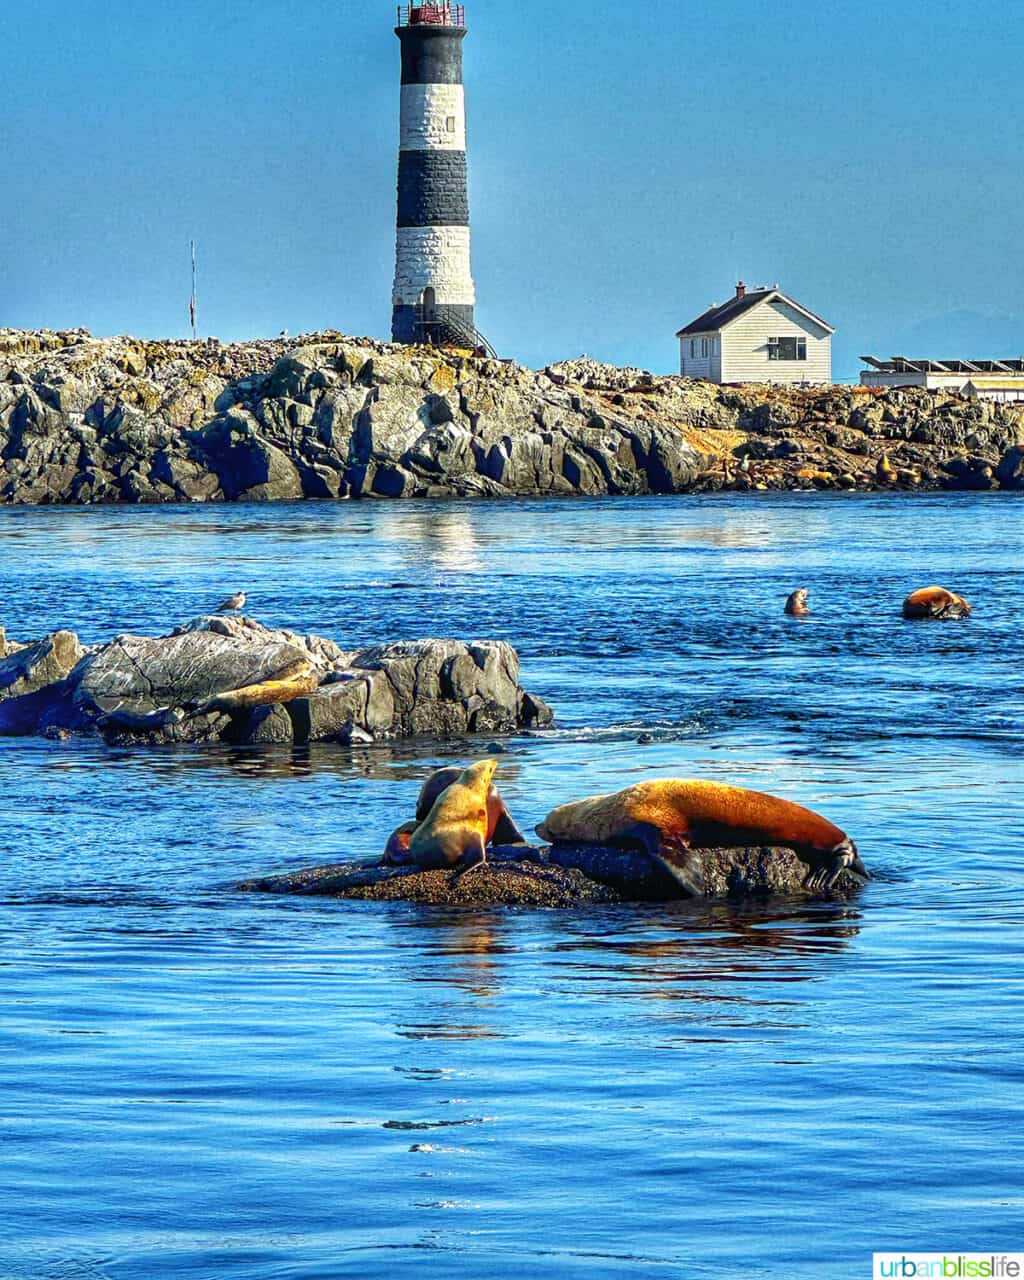 Lighthouse and rock formation in the background with seals and sea lions in the water in the foreground.